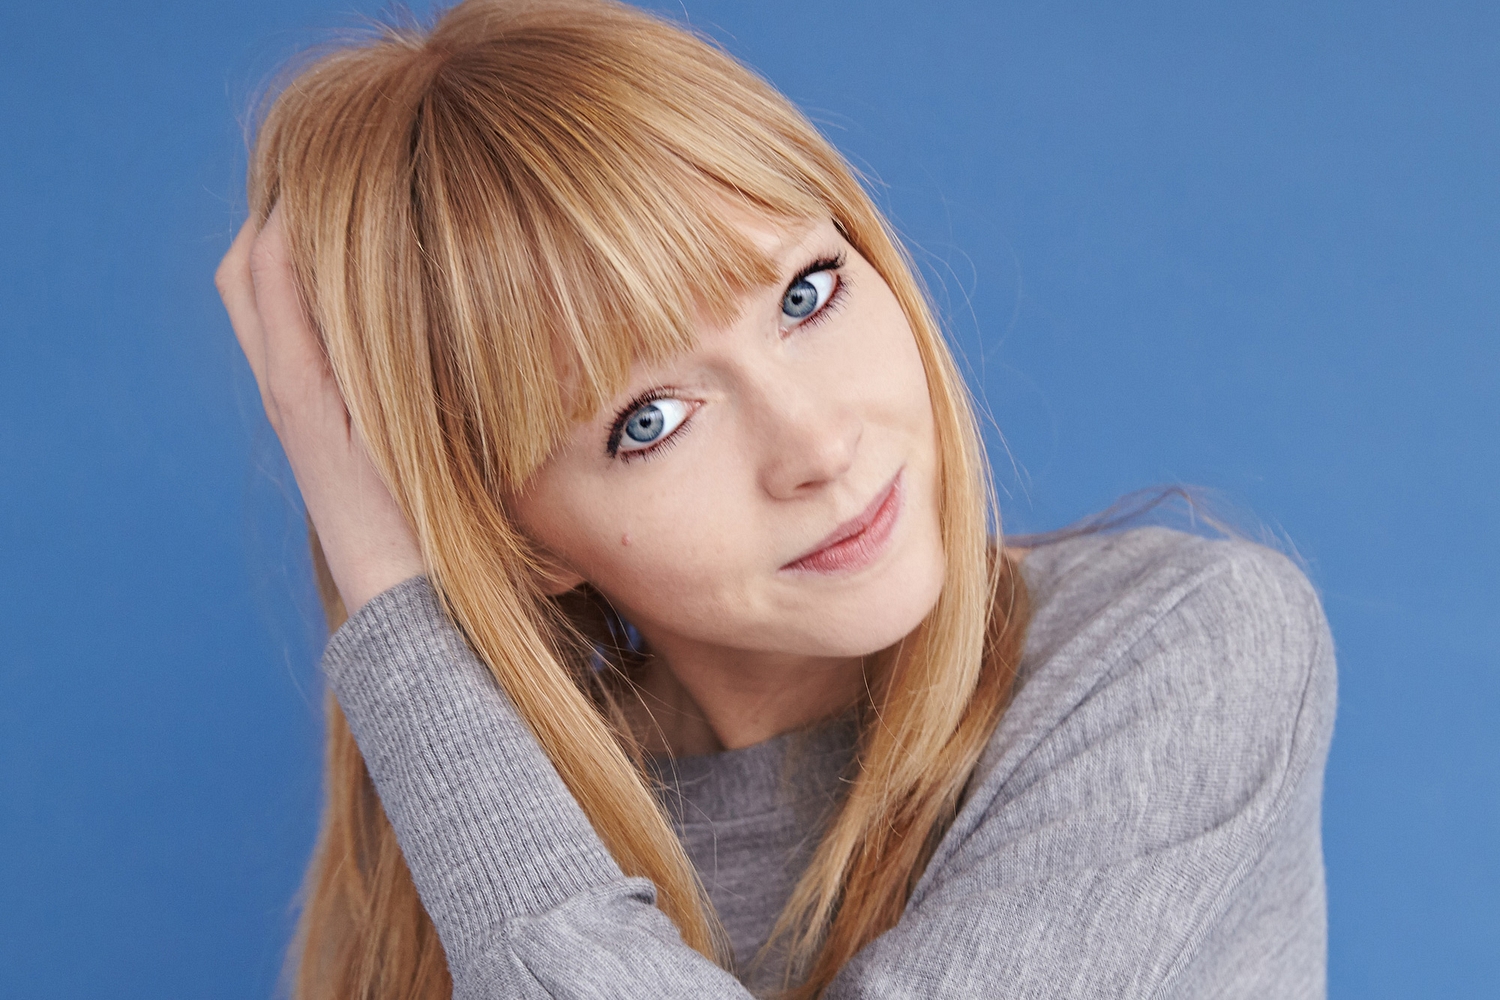 Lucy Rose shares ‘Our Eyes’ video